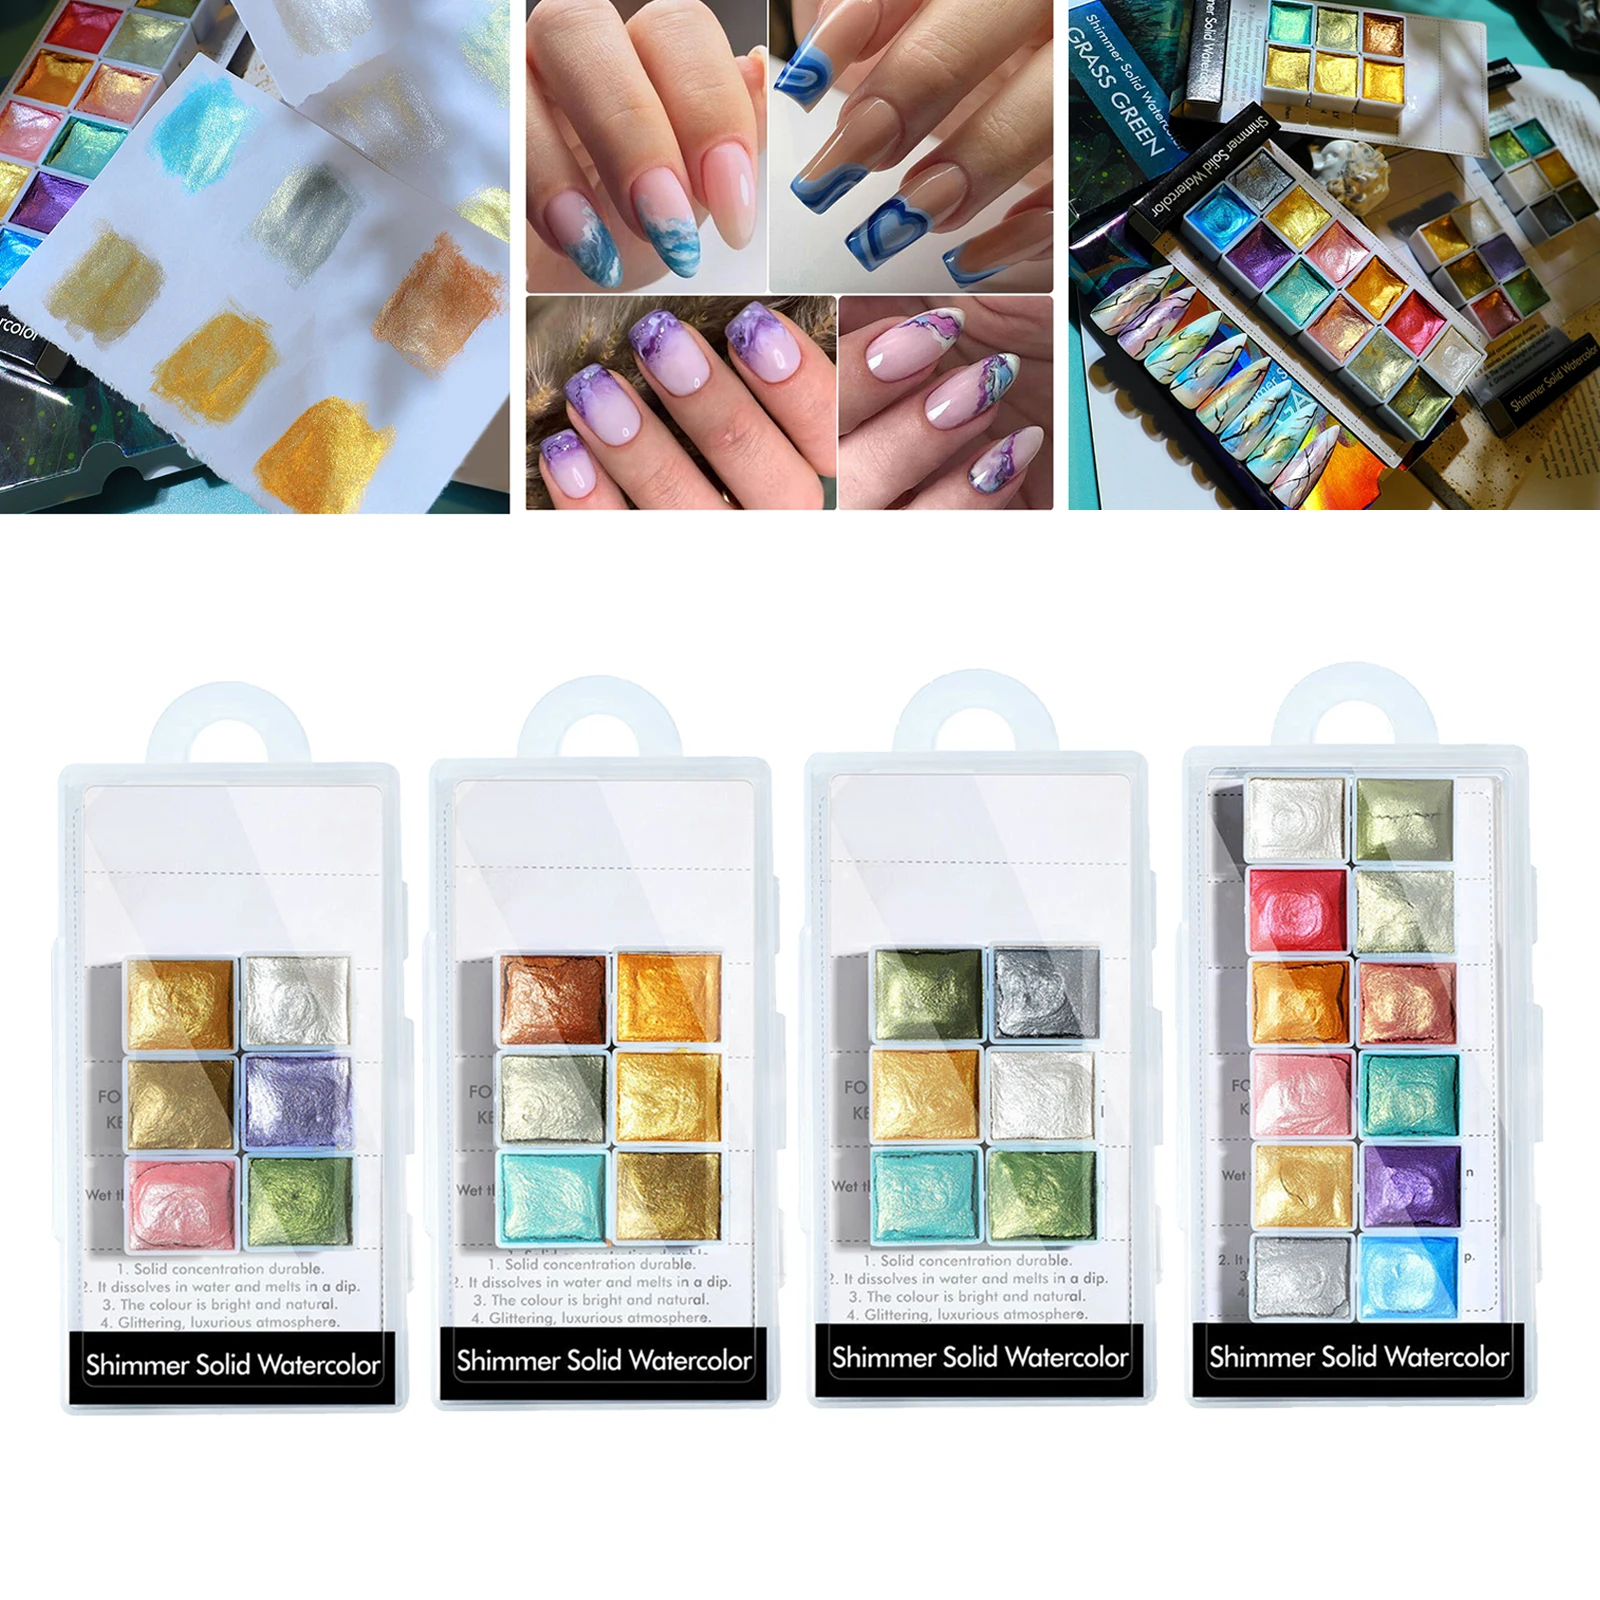 6 Colors Assorted Water Colors Travel Pocket Set, Easy to Blend Colors - Built in Palette - Perfect for Painting